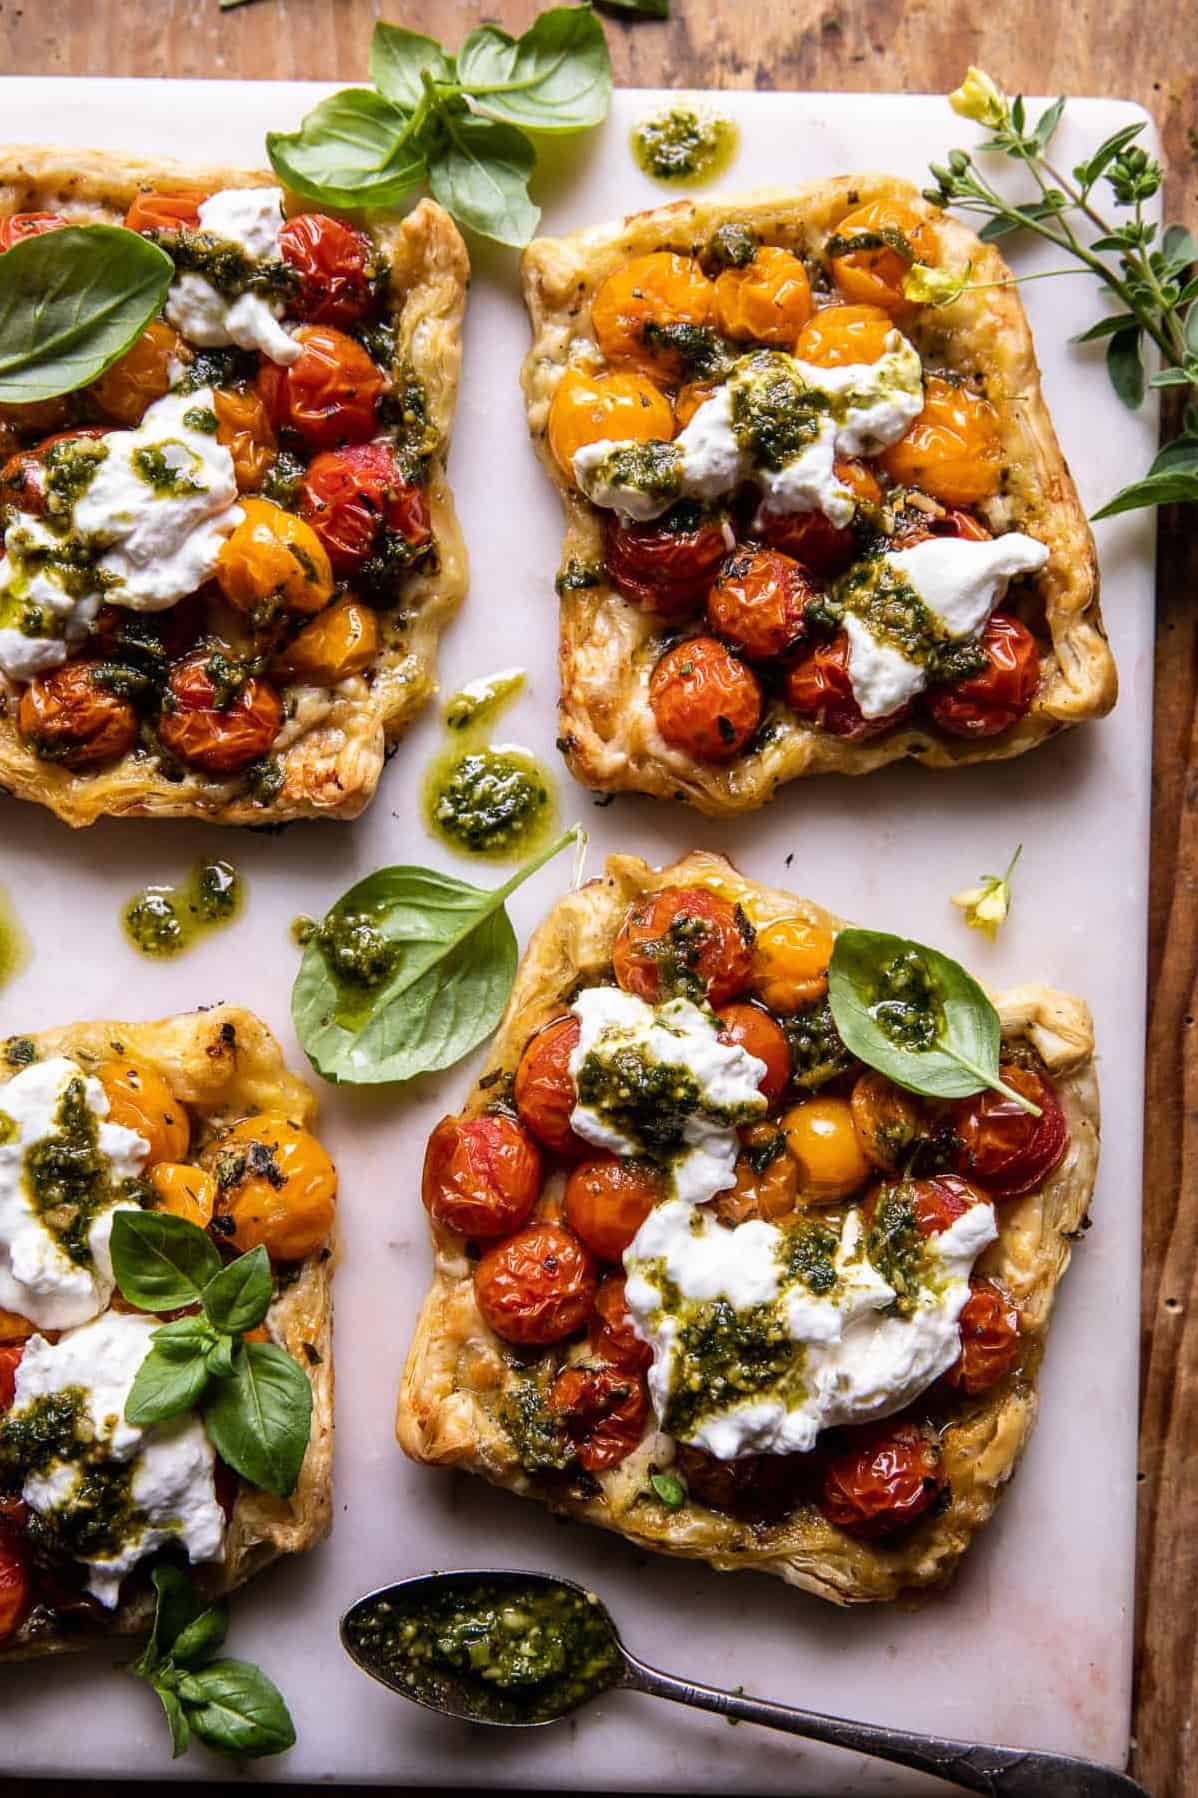  The perfect combination of tangy tomatoes and savory pesto on a flaky crust